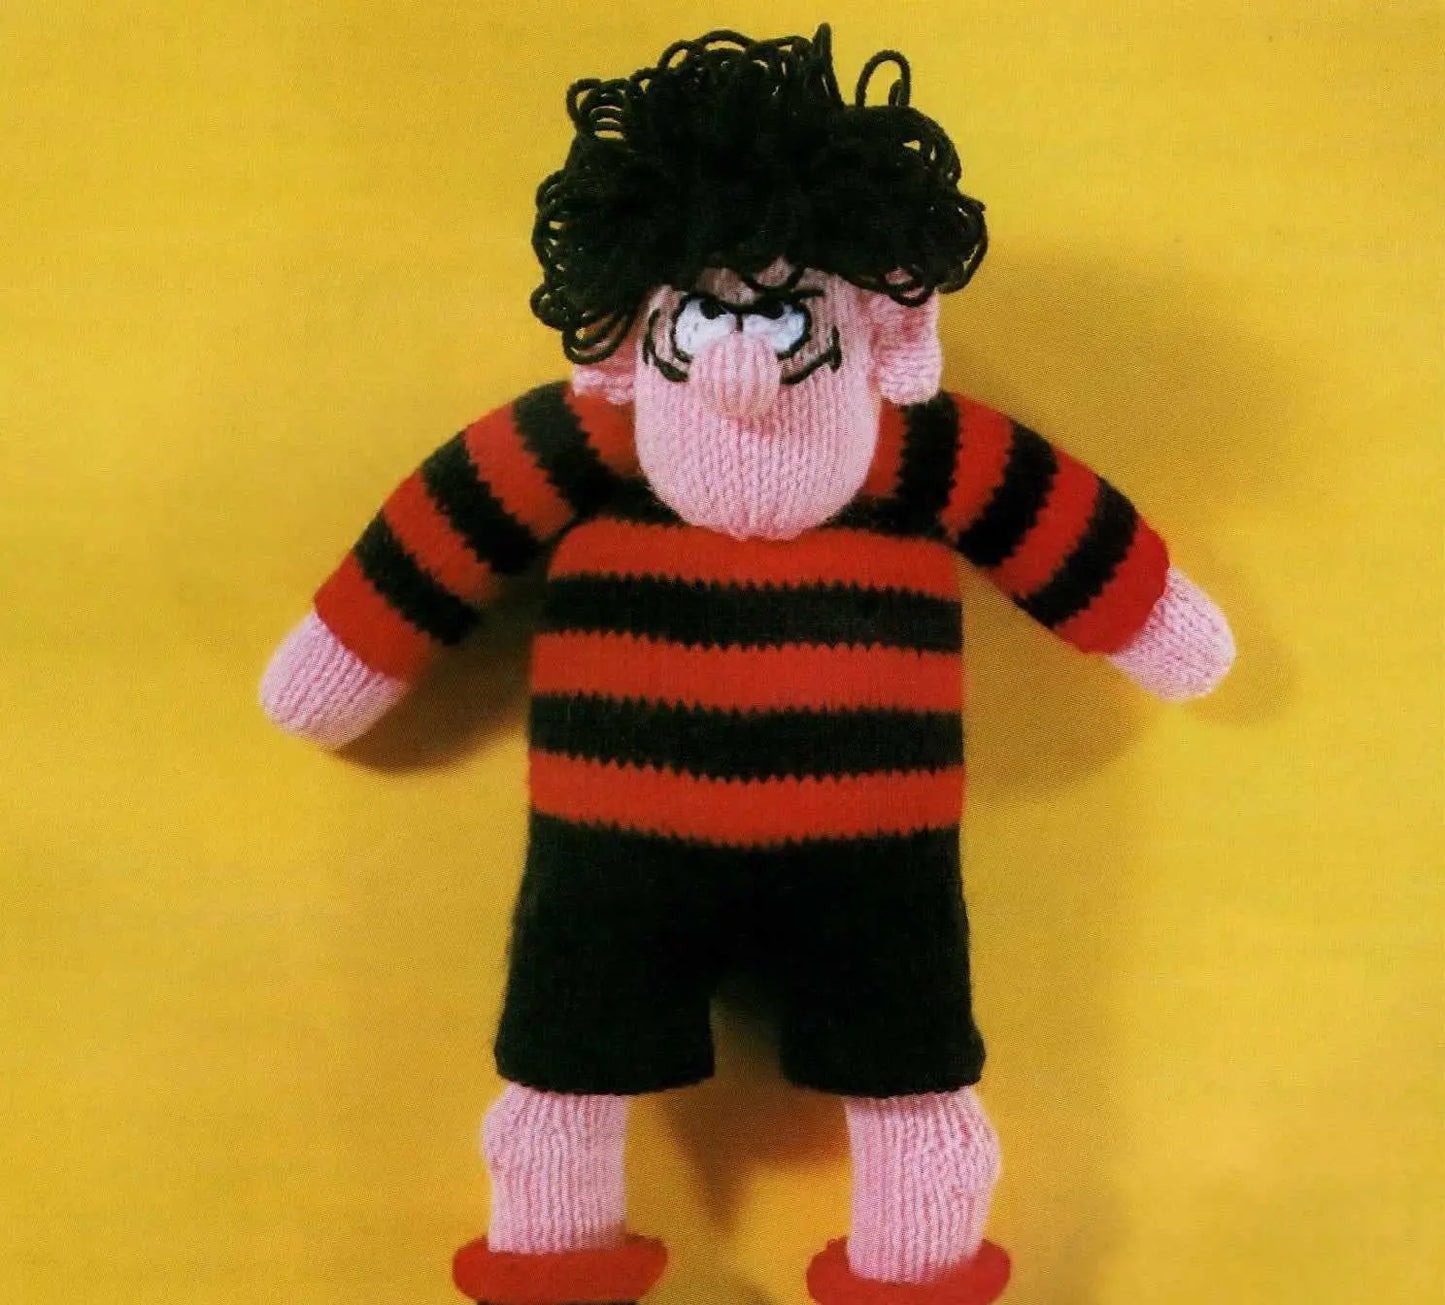  Dennis The Menace and Gnasher Toy Knitting Pattern by Cross Stitch Chart Heaven sold by Free Spirit Accessories